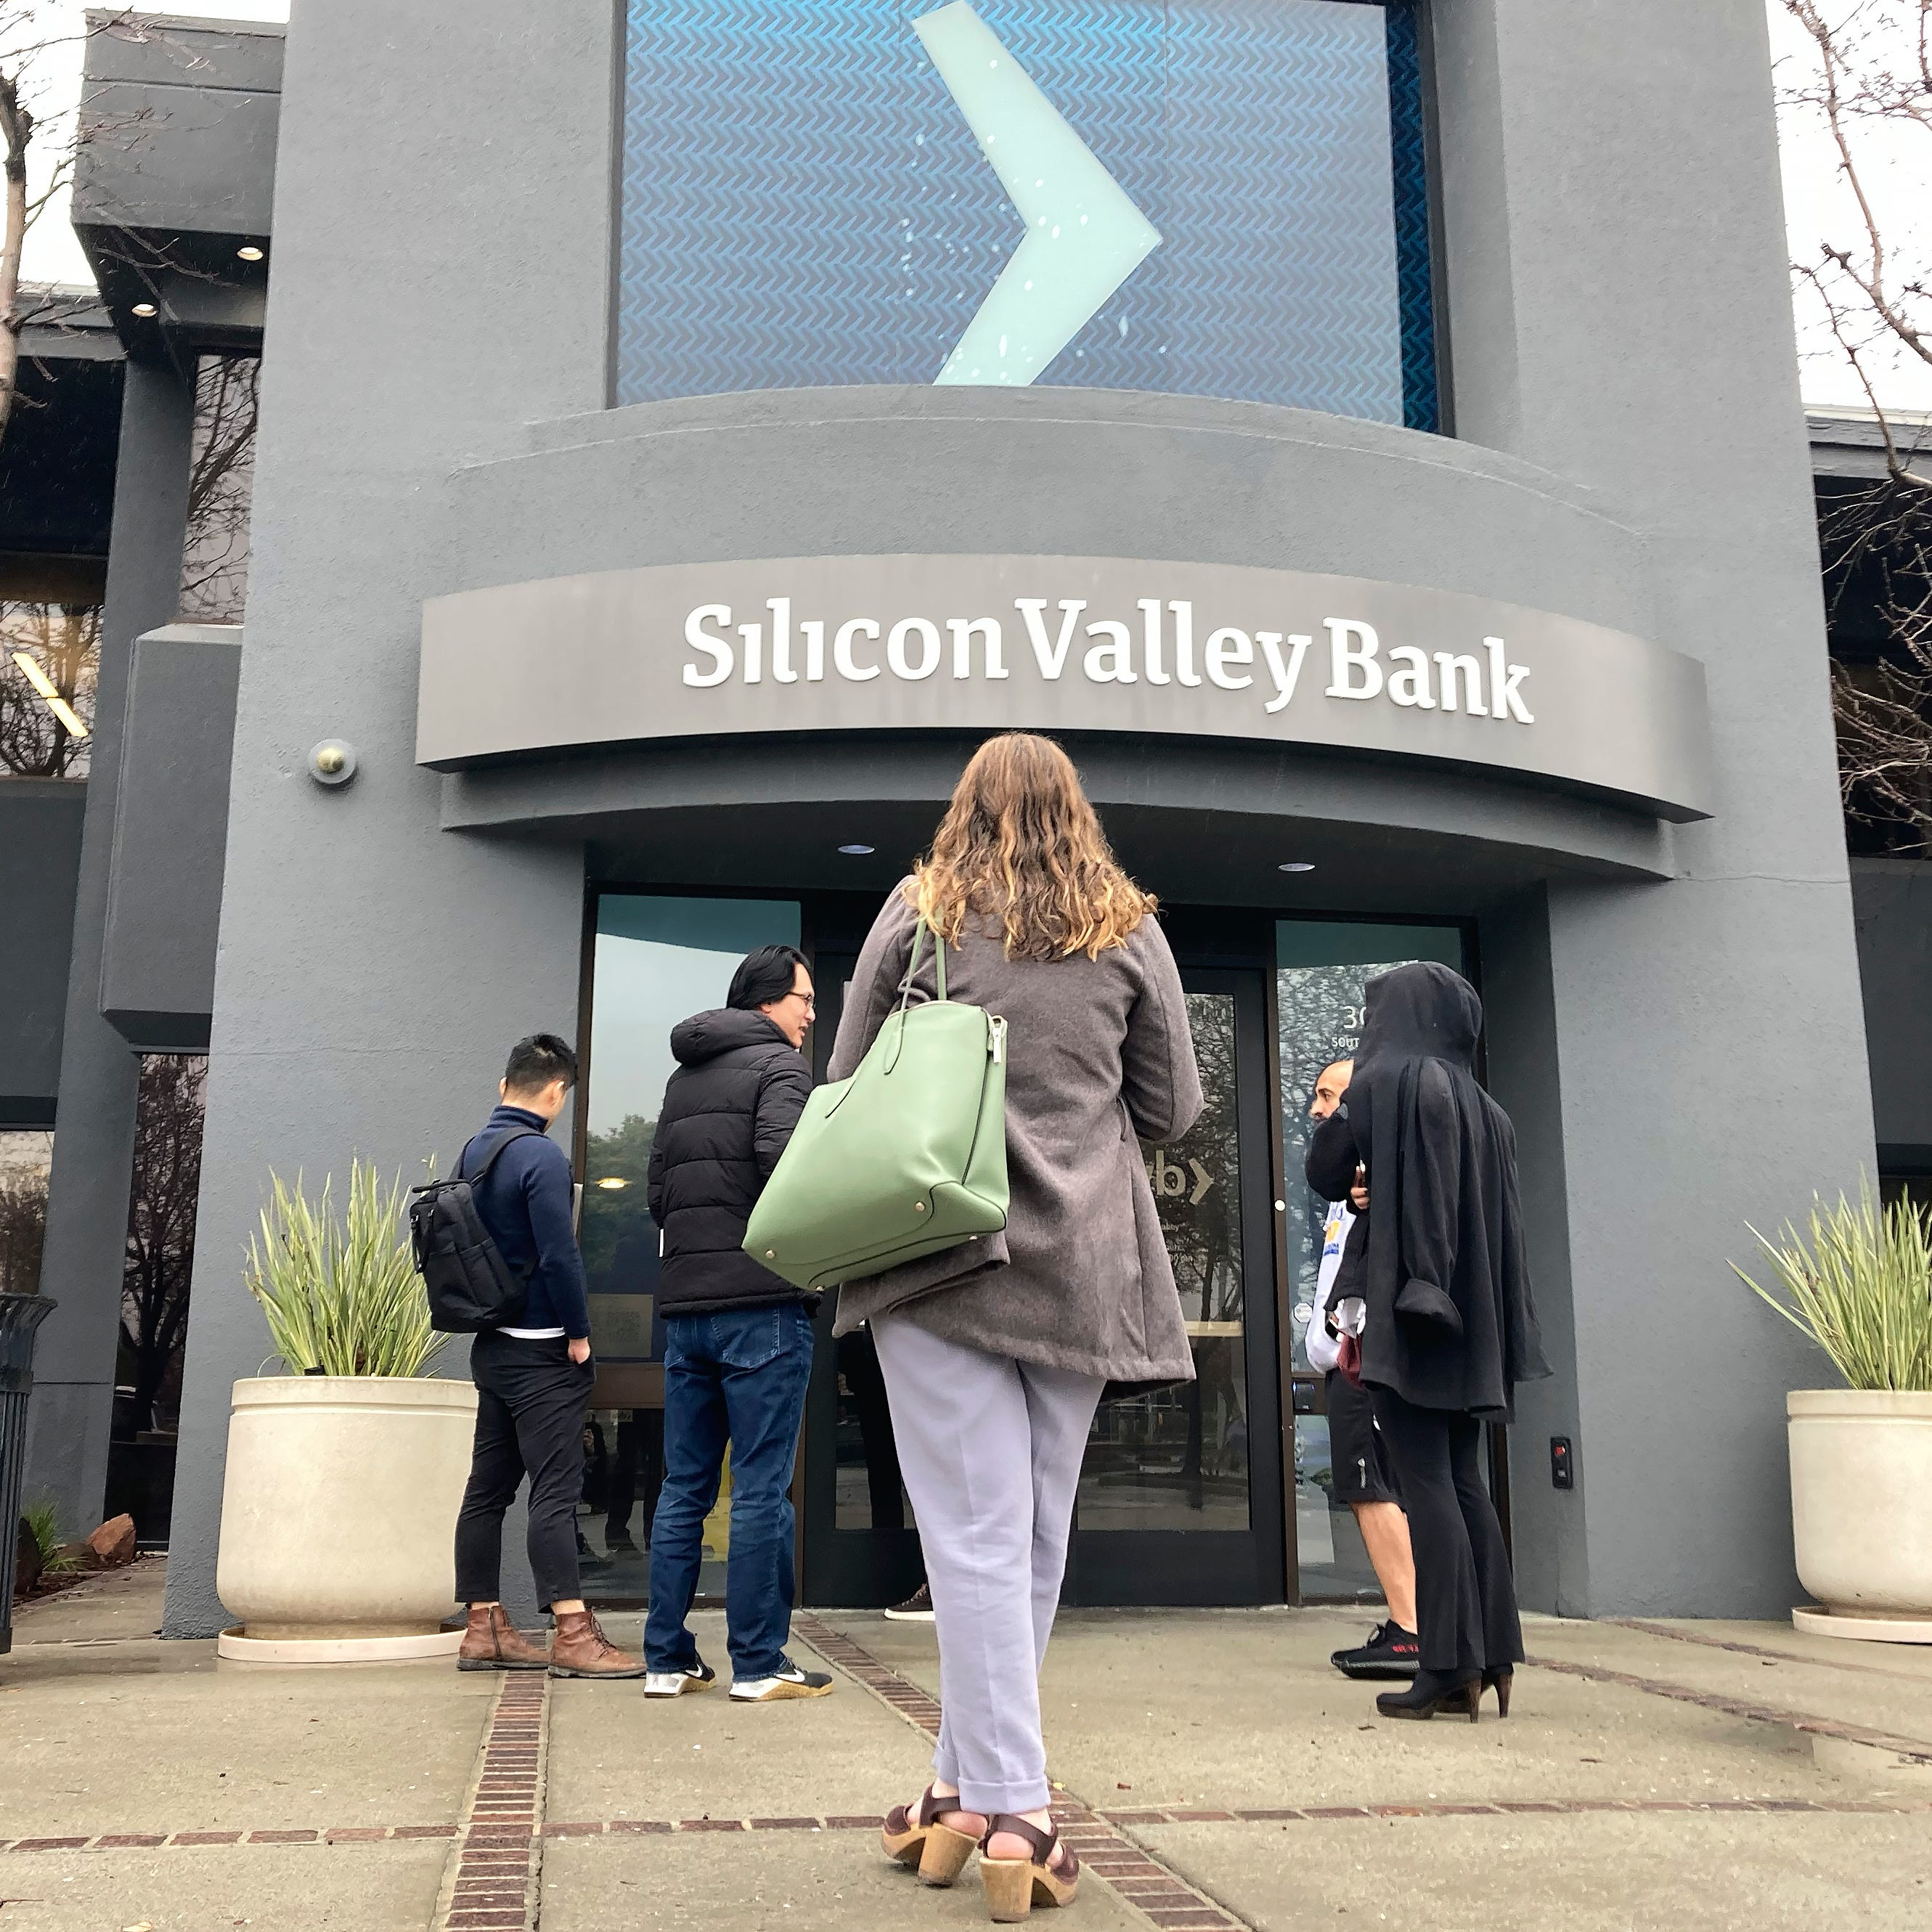 People stand outside of an entrance to Silicon Valley Bank in Santa Clara, Calif., Friday, March 10, 2023. The Federal Deposit Insurance Corporation seized the assets of the bank on Friday, marking the largest bank failure since Washington Mutual during the height of the 2008 financial crisis. (AP Photo/Jeff Chiu)